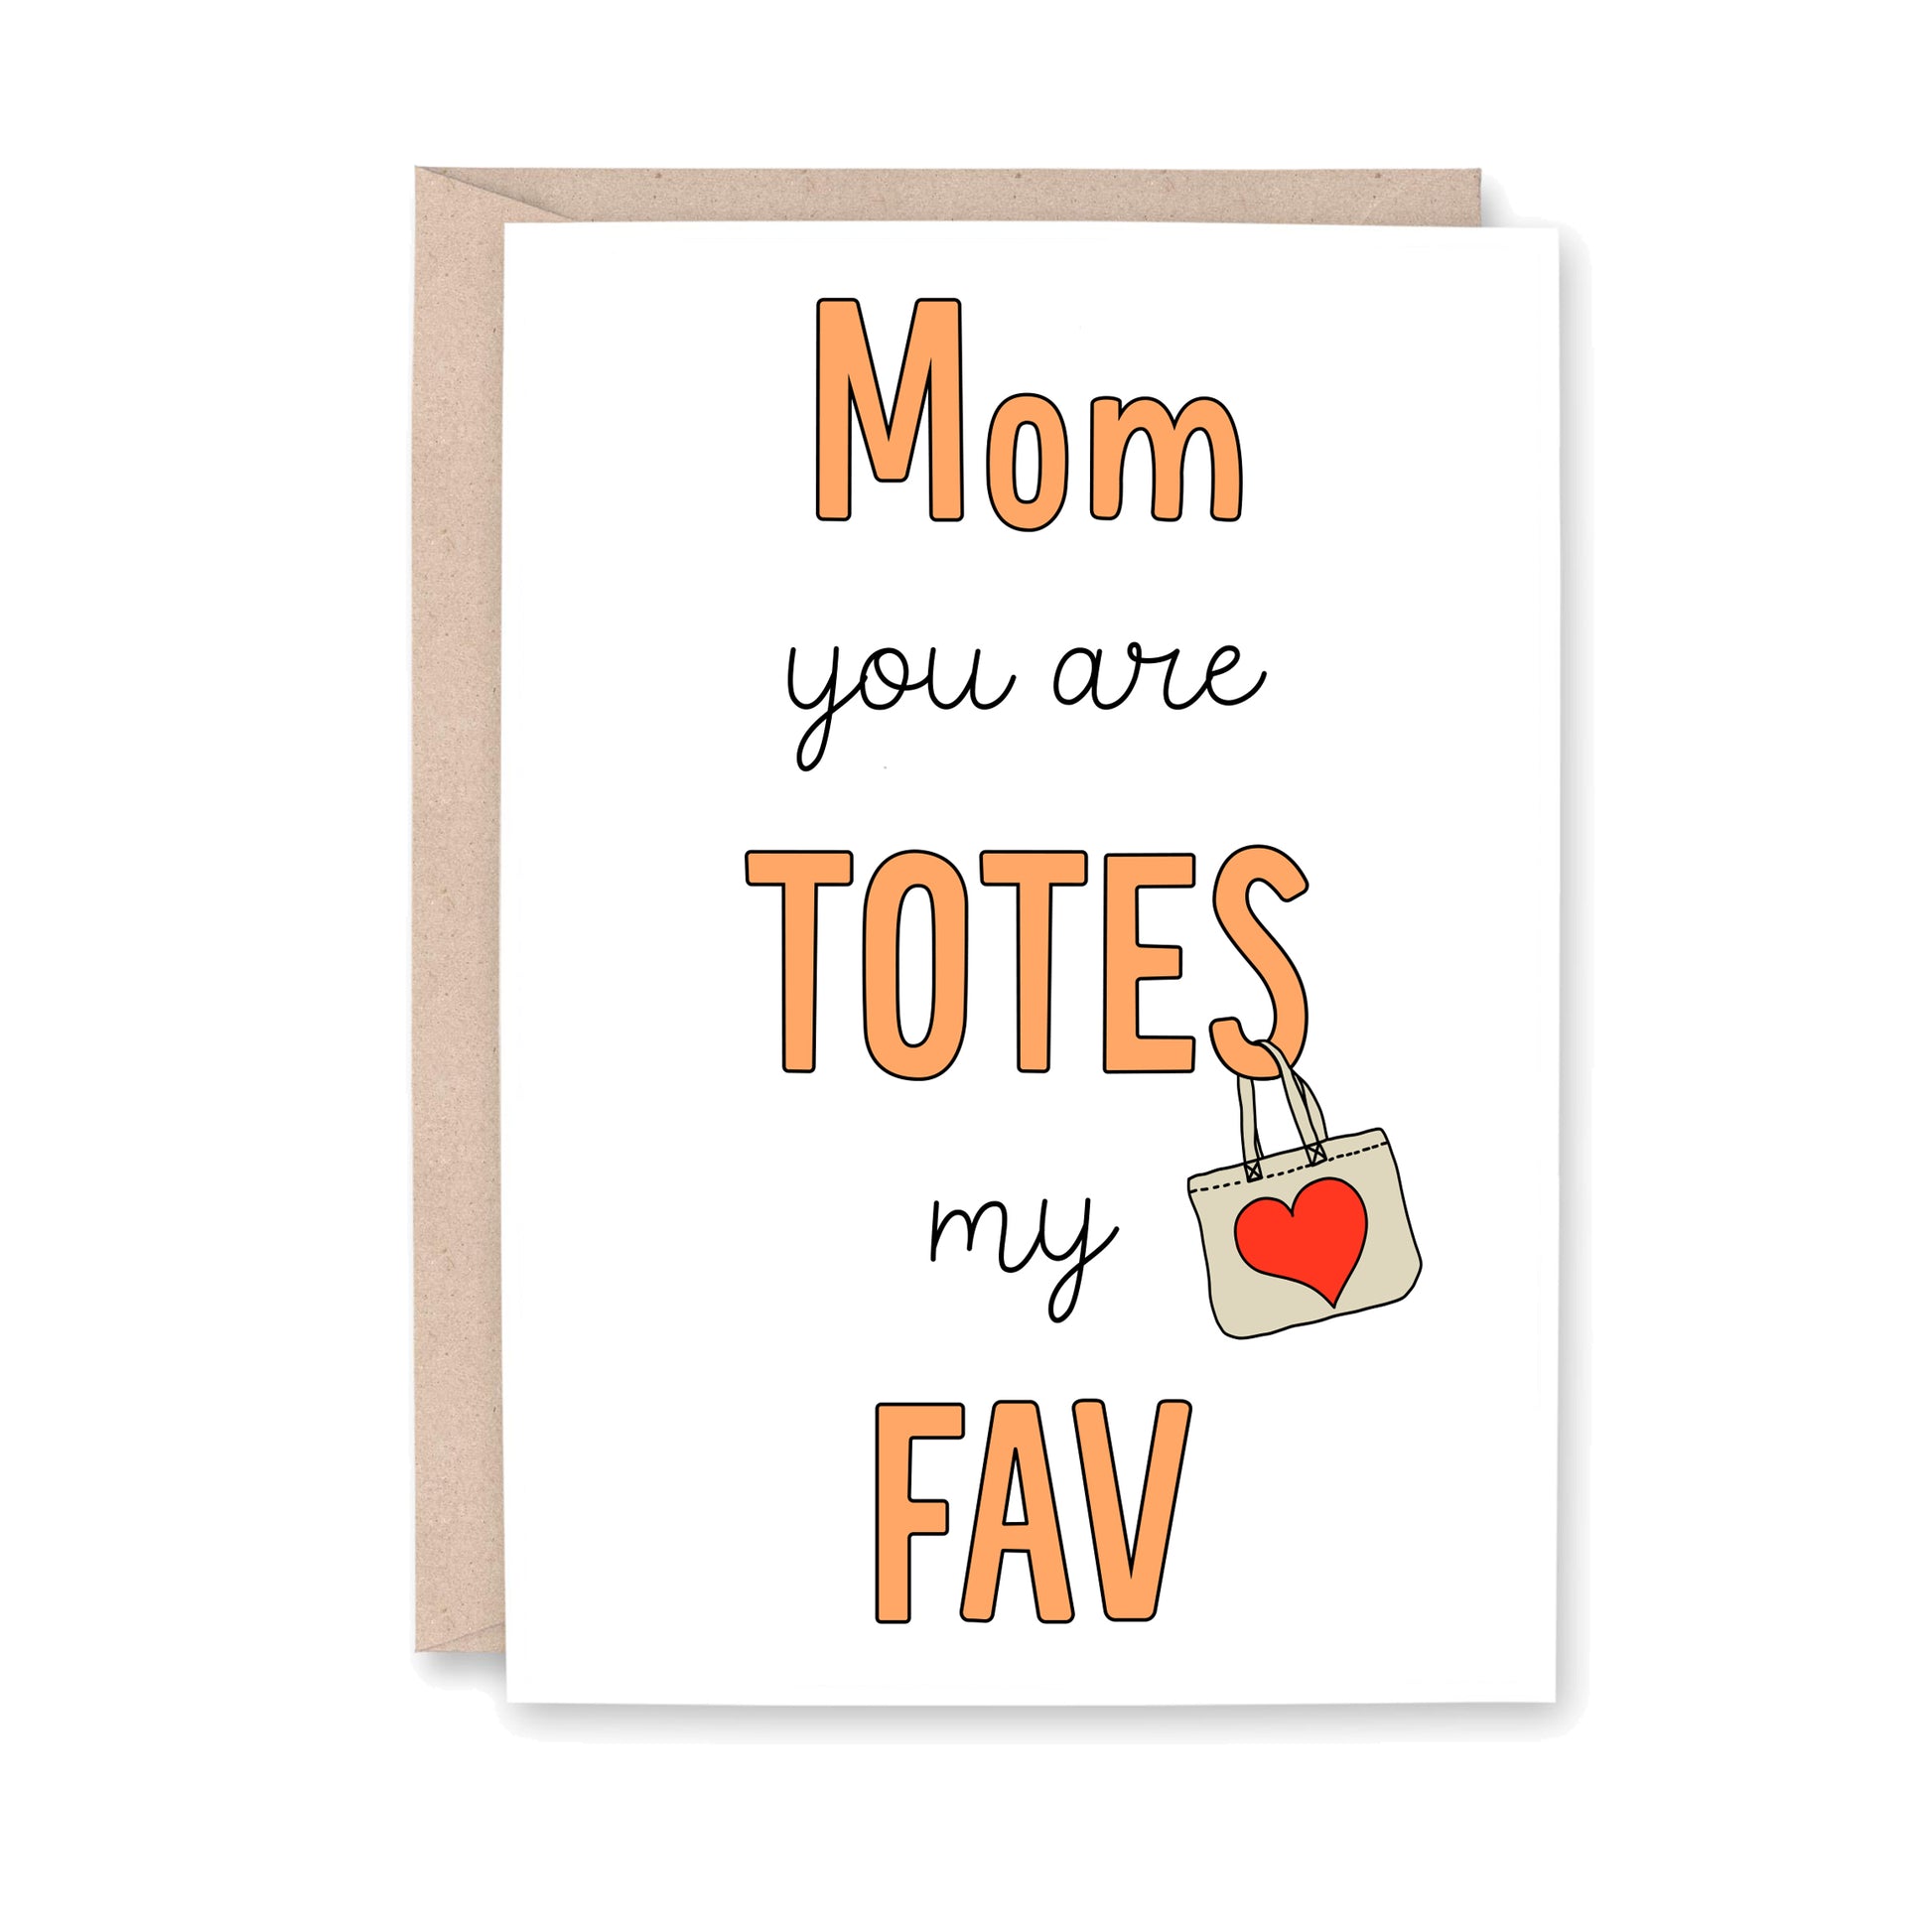 Greeting card with drawing of totebag with a heart on it that says "Mom you are TOTES my FAV"